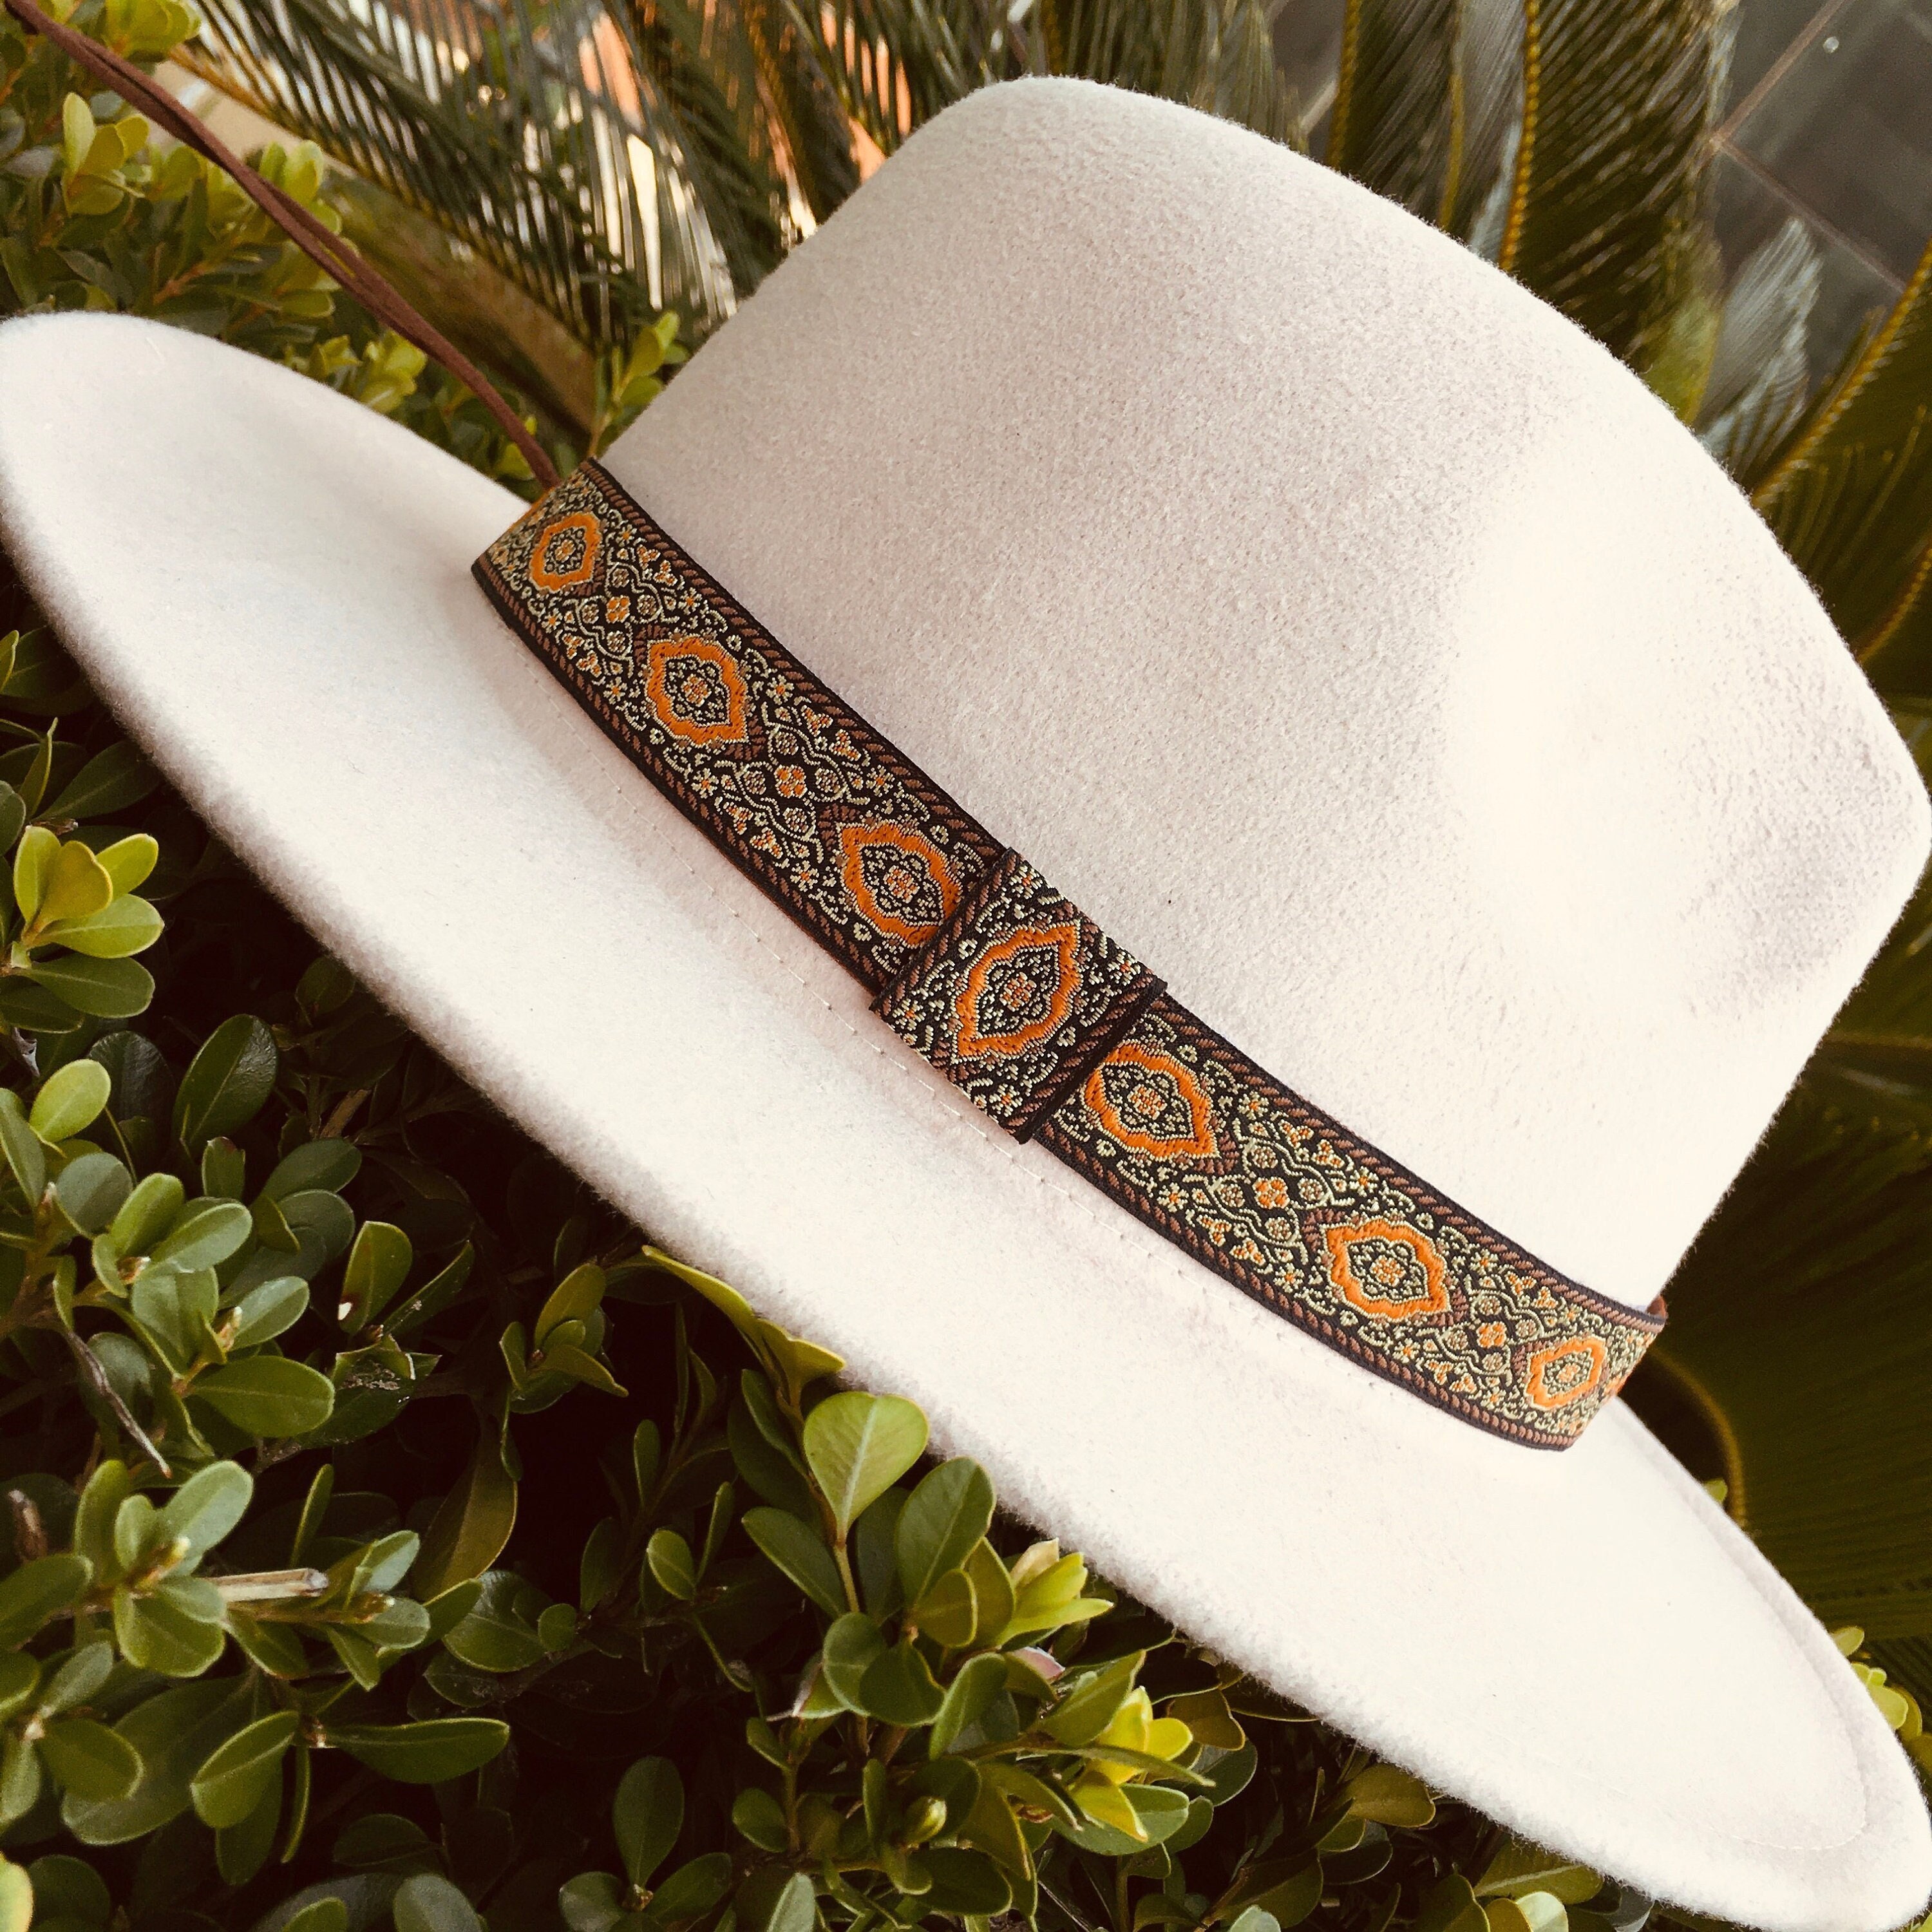 Hat band, Cowboy hat Accessories, Adjustable Fedora Hatband, Unisex Western  Hat Jewelry, Cowgirl Hat band, Hatband for women (Blue, Black, Silver)